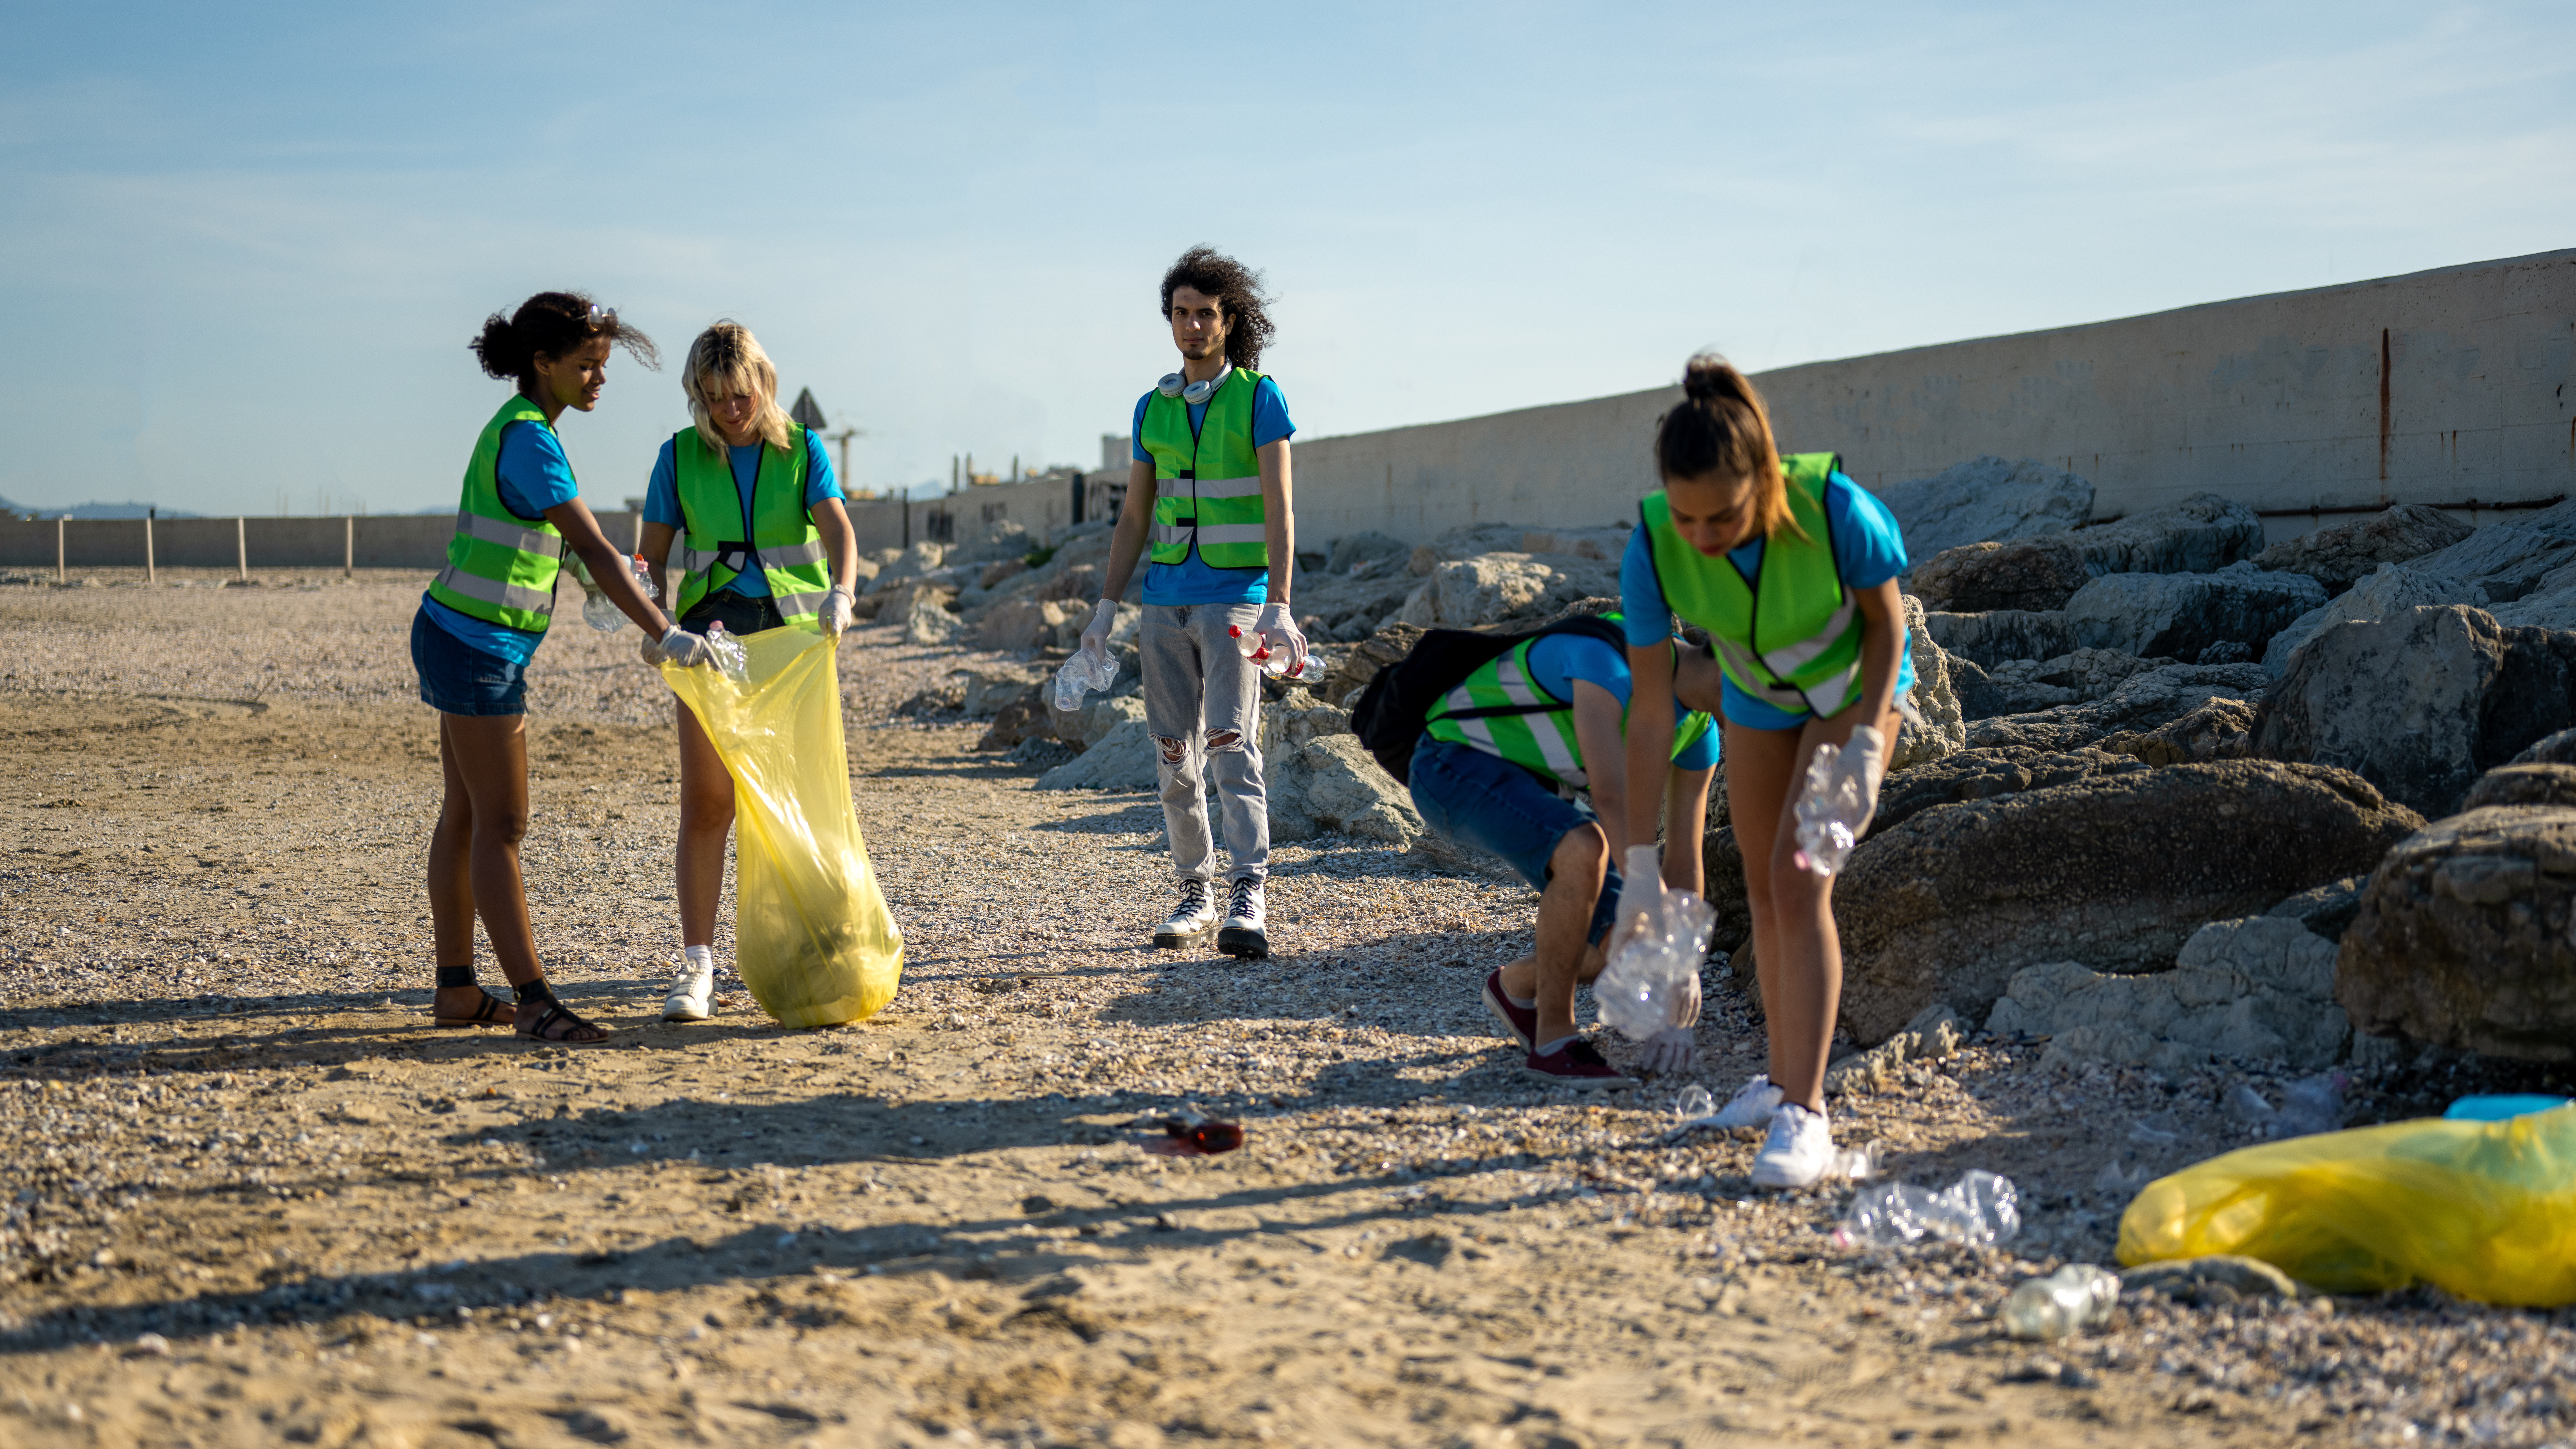 A group of teens in neon vests pick up trash on a beach